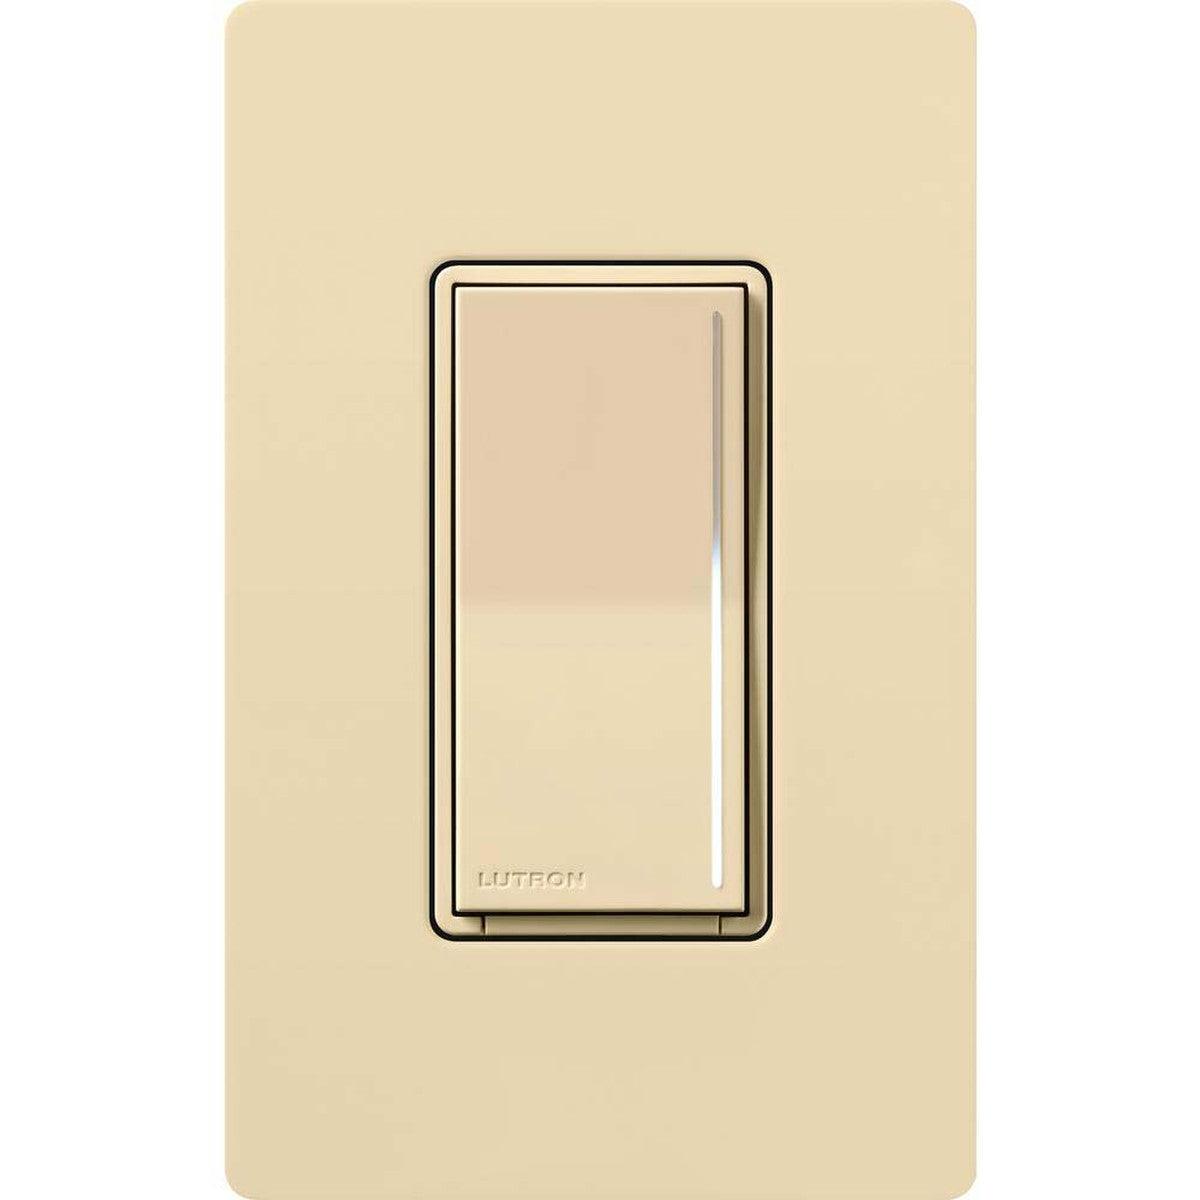 Lutron Sunnata Dimmer Switches and Light Switches - Bees Lighting